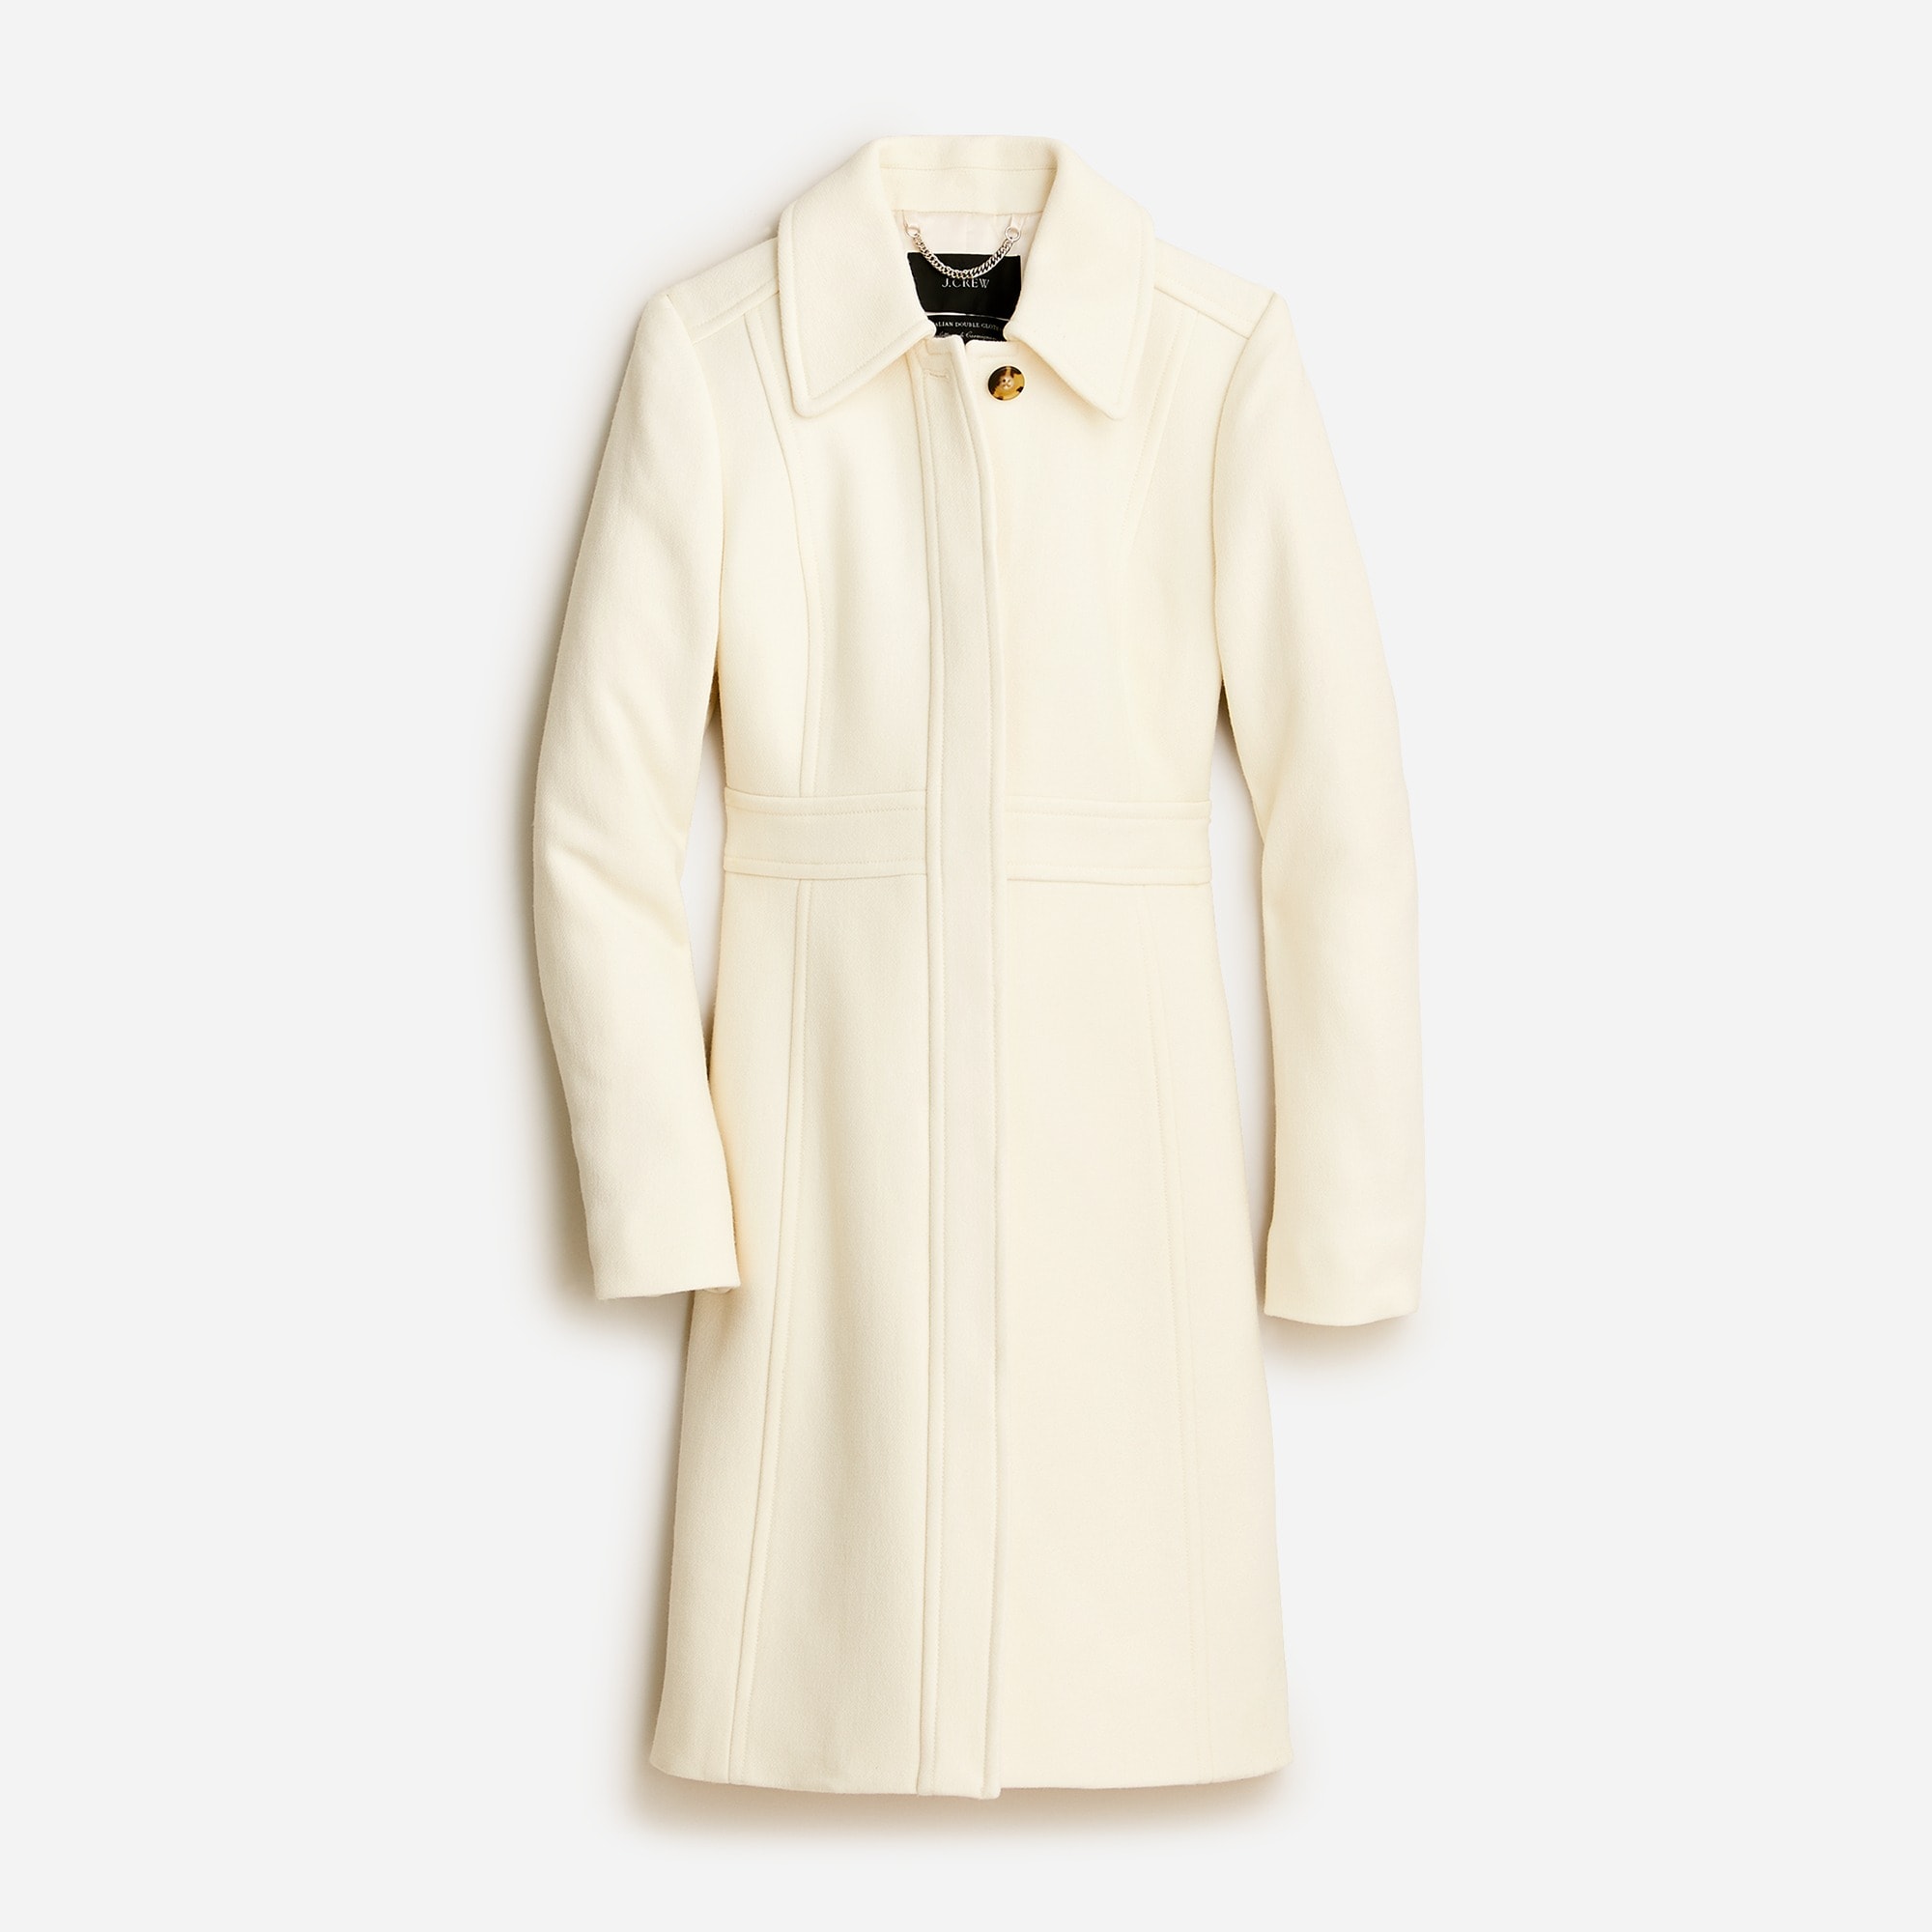  New lady day topcoat in Italian double-cloth wool blend